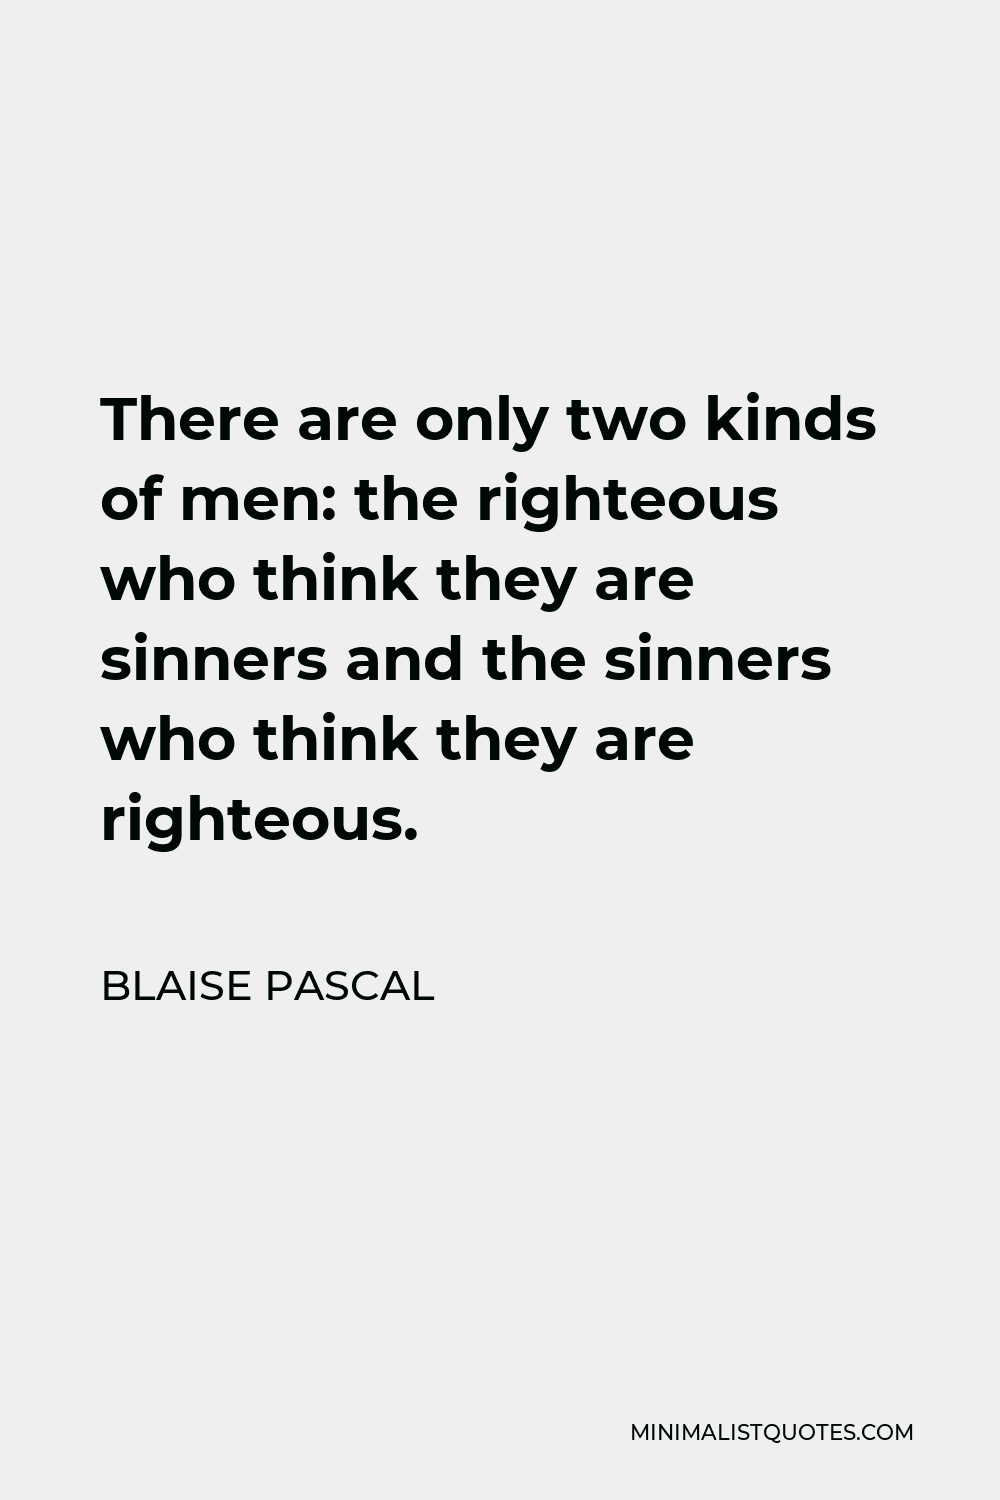 Blaise Pascal Quote - There are only two kinds of men: the righteous who think they are sinners and the sinners who think they are righteous.